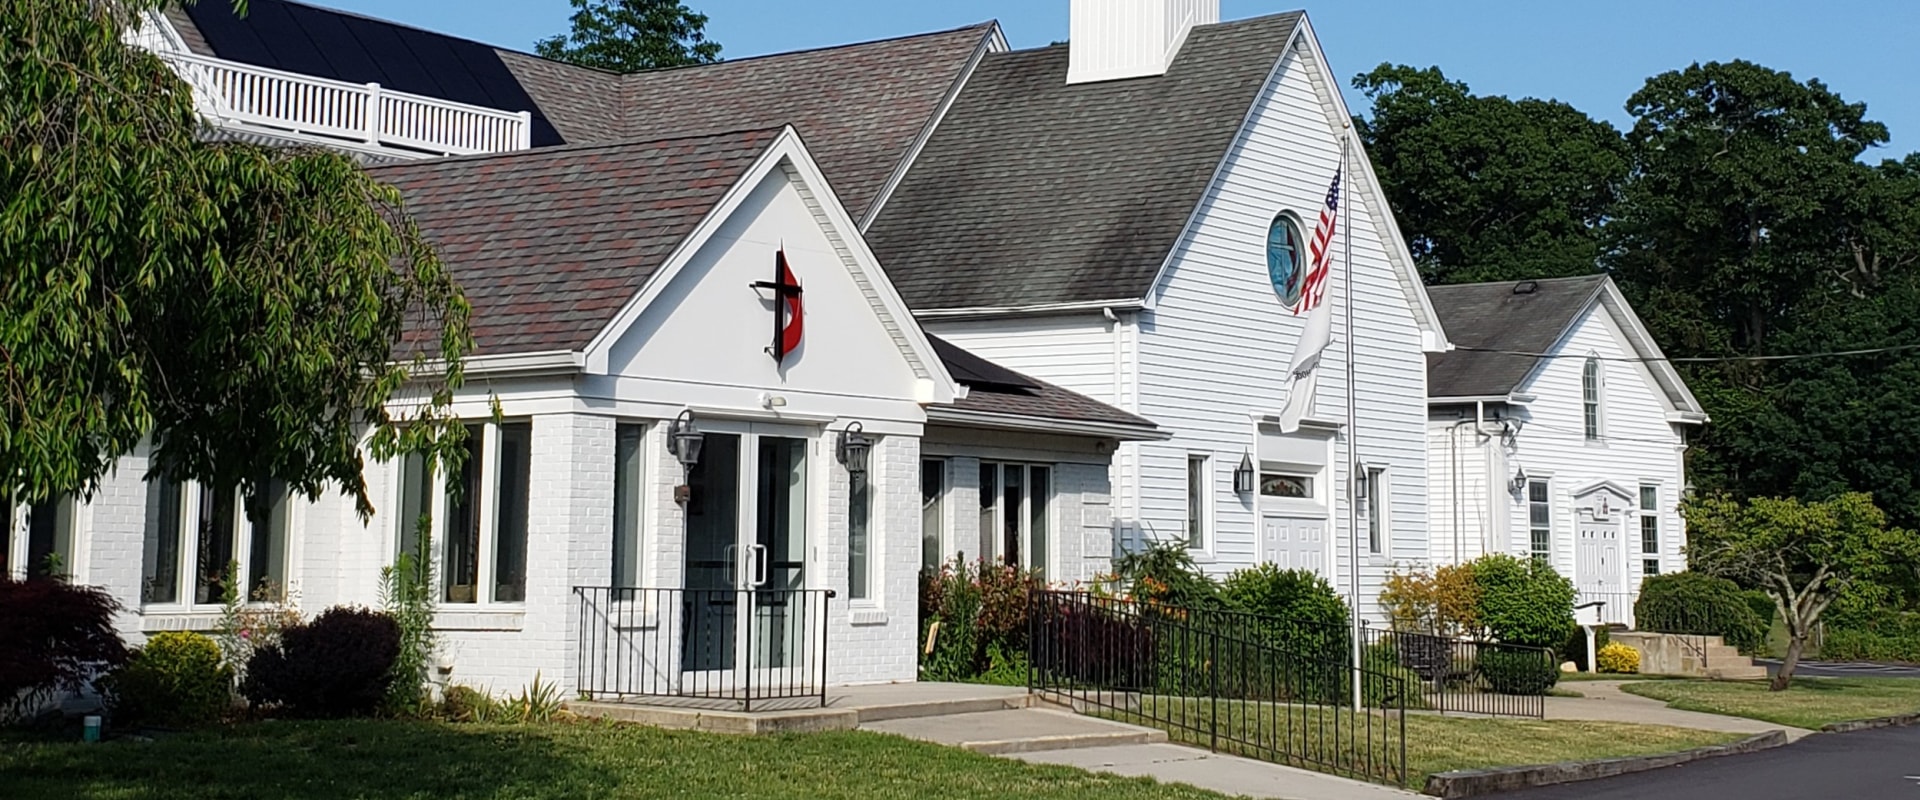 Outreach Programs and Ministries of the United Methodist Church in Suffolk County, NY